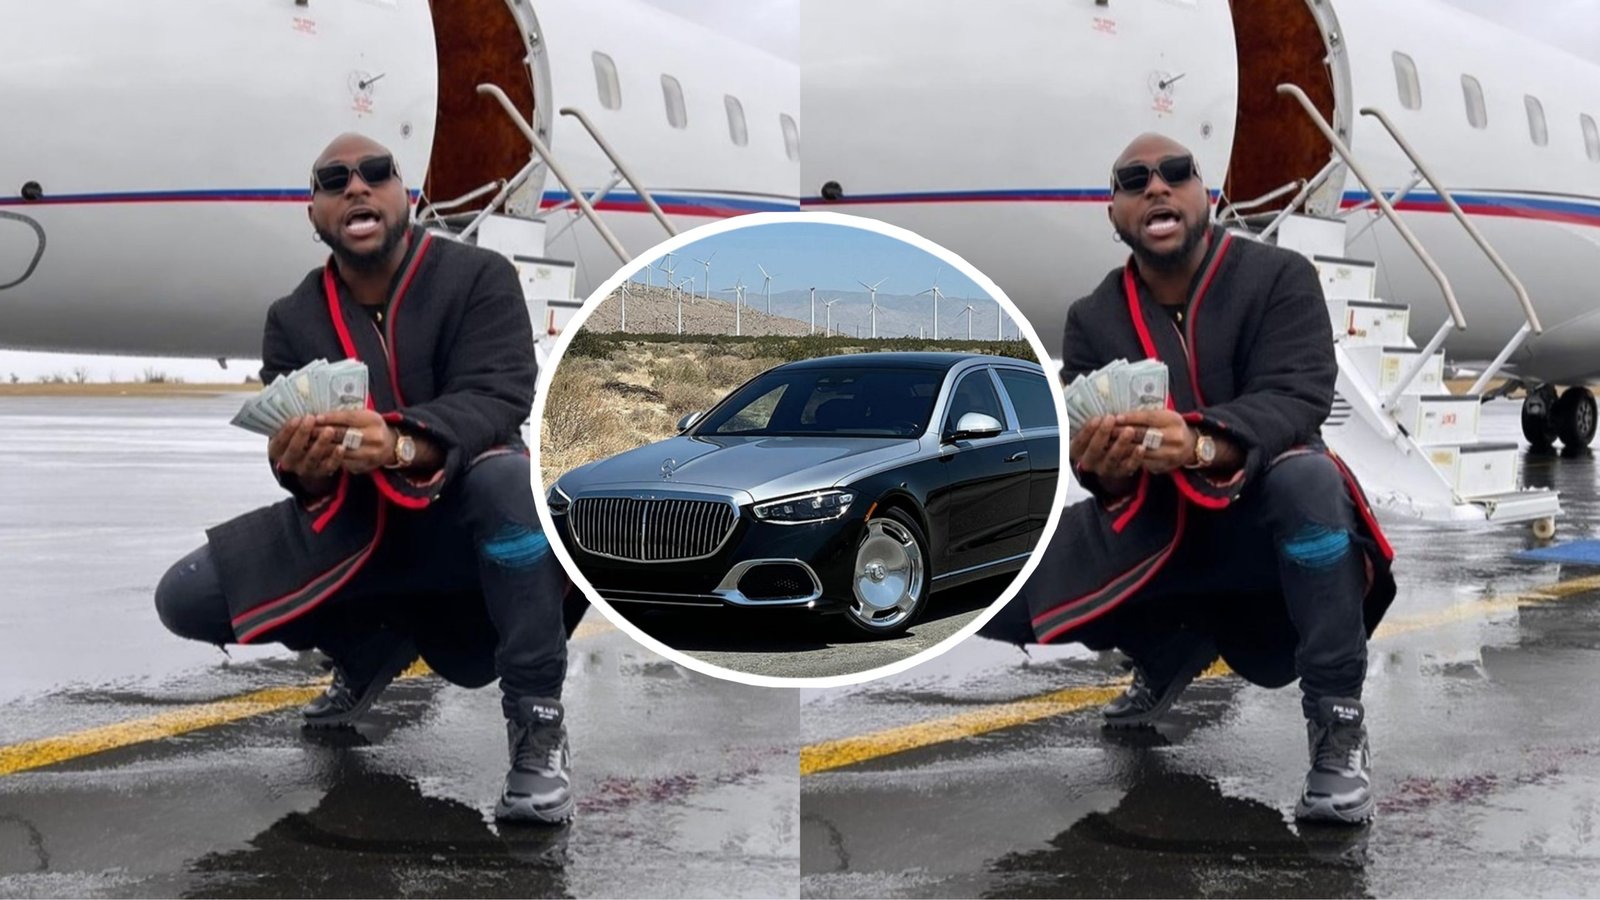 “Omo I am my fathers child” Davido says as he plan on acquiring a brand new super car worth millions